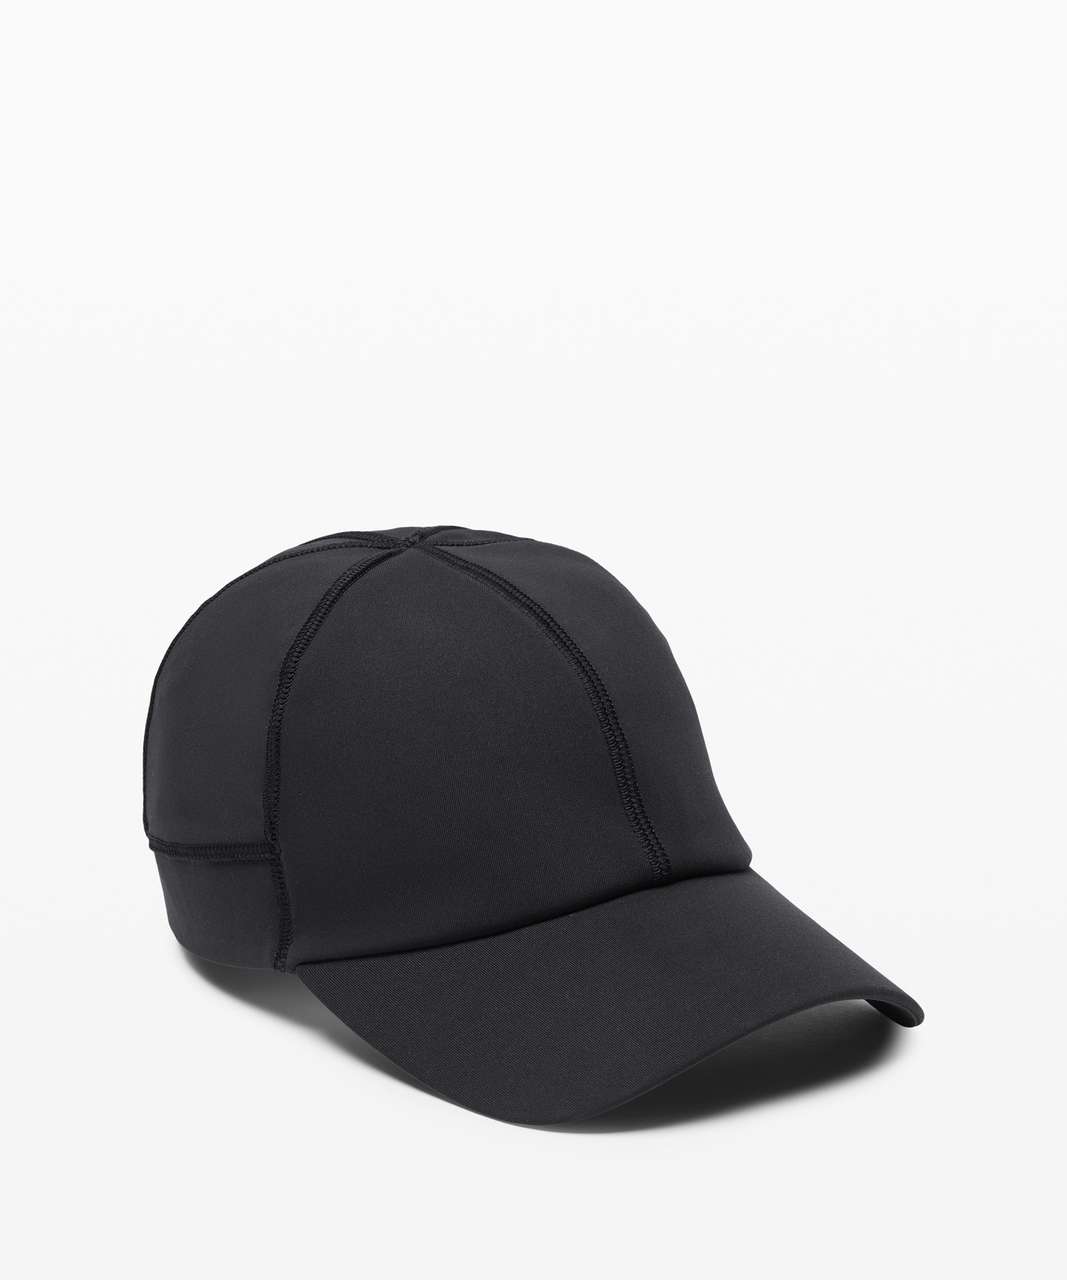 Lululemon License to Train Women’s Hat *SurroundStretch™ - Black (First Release)